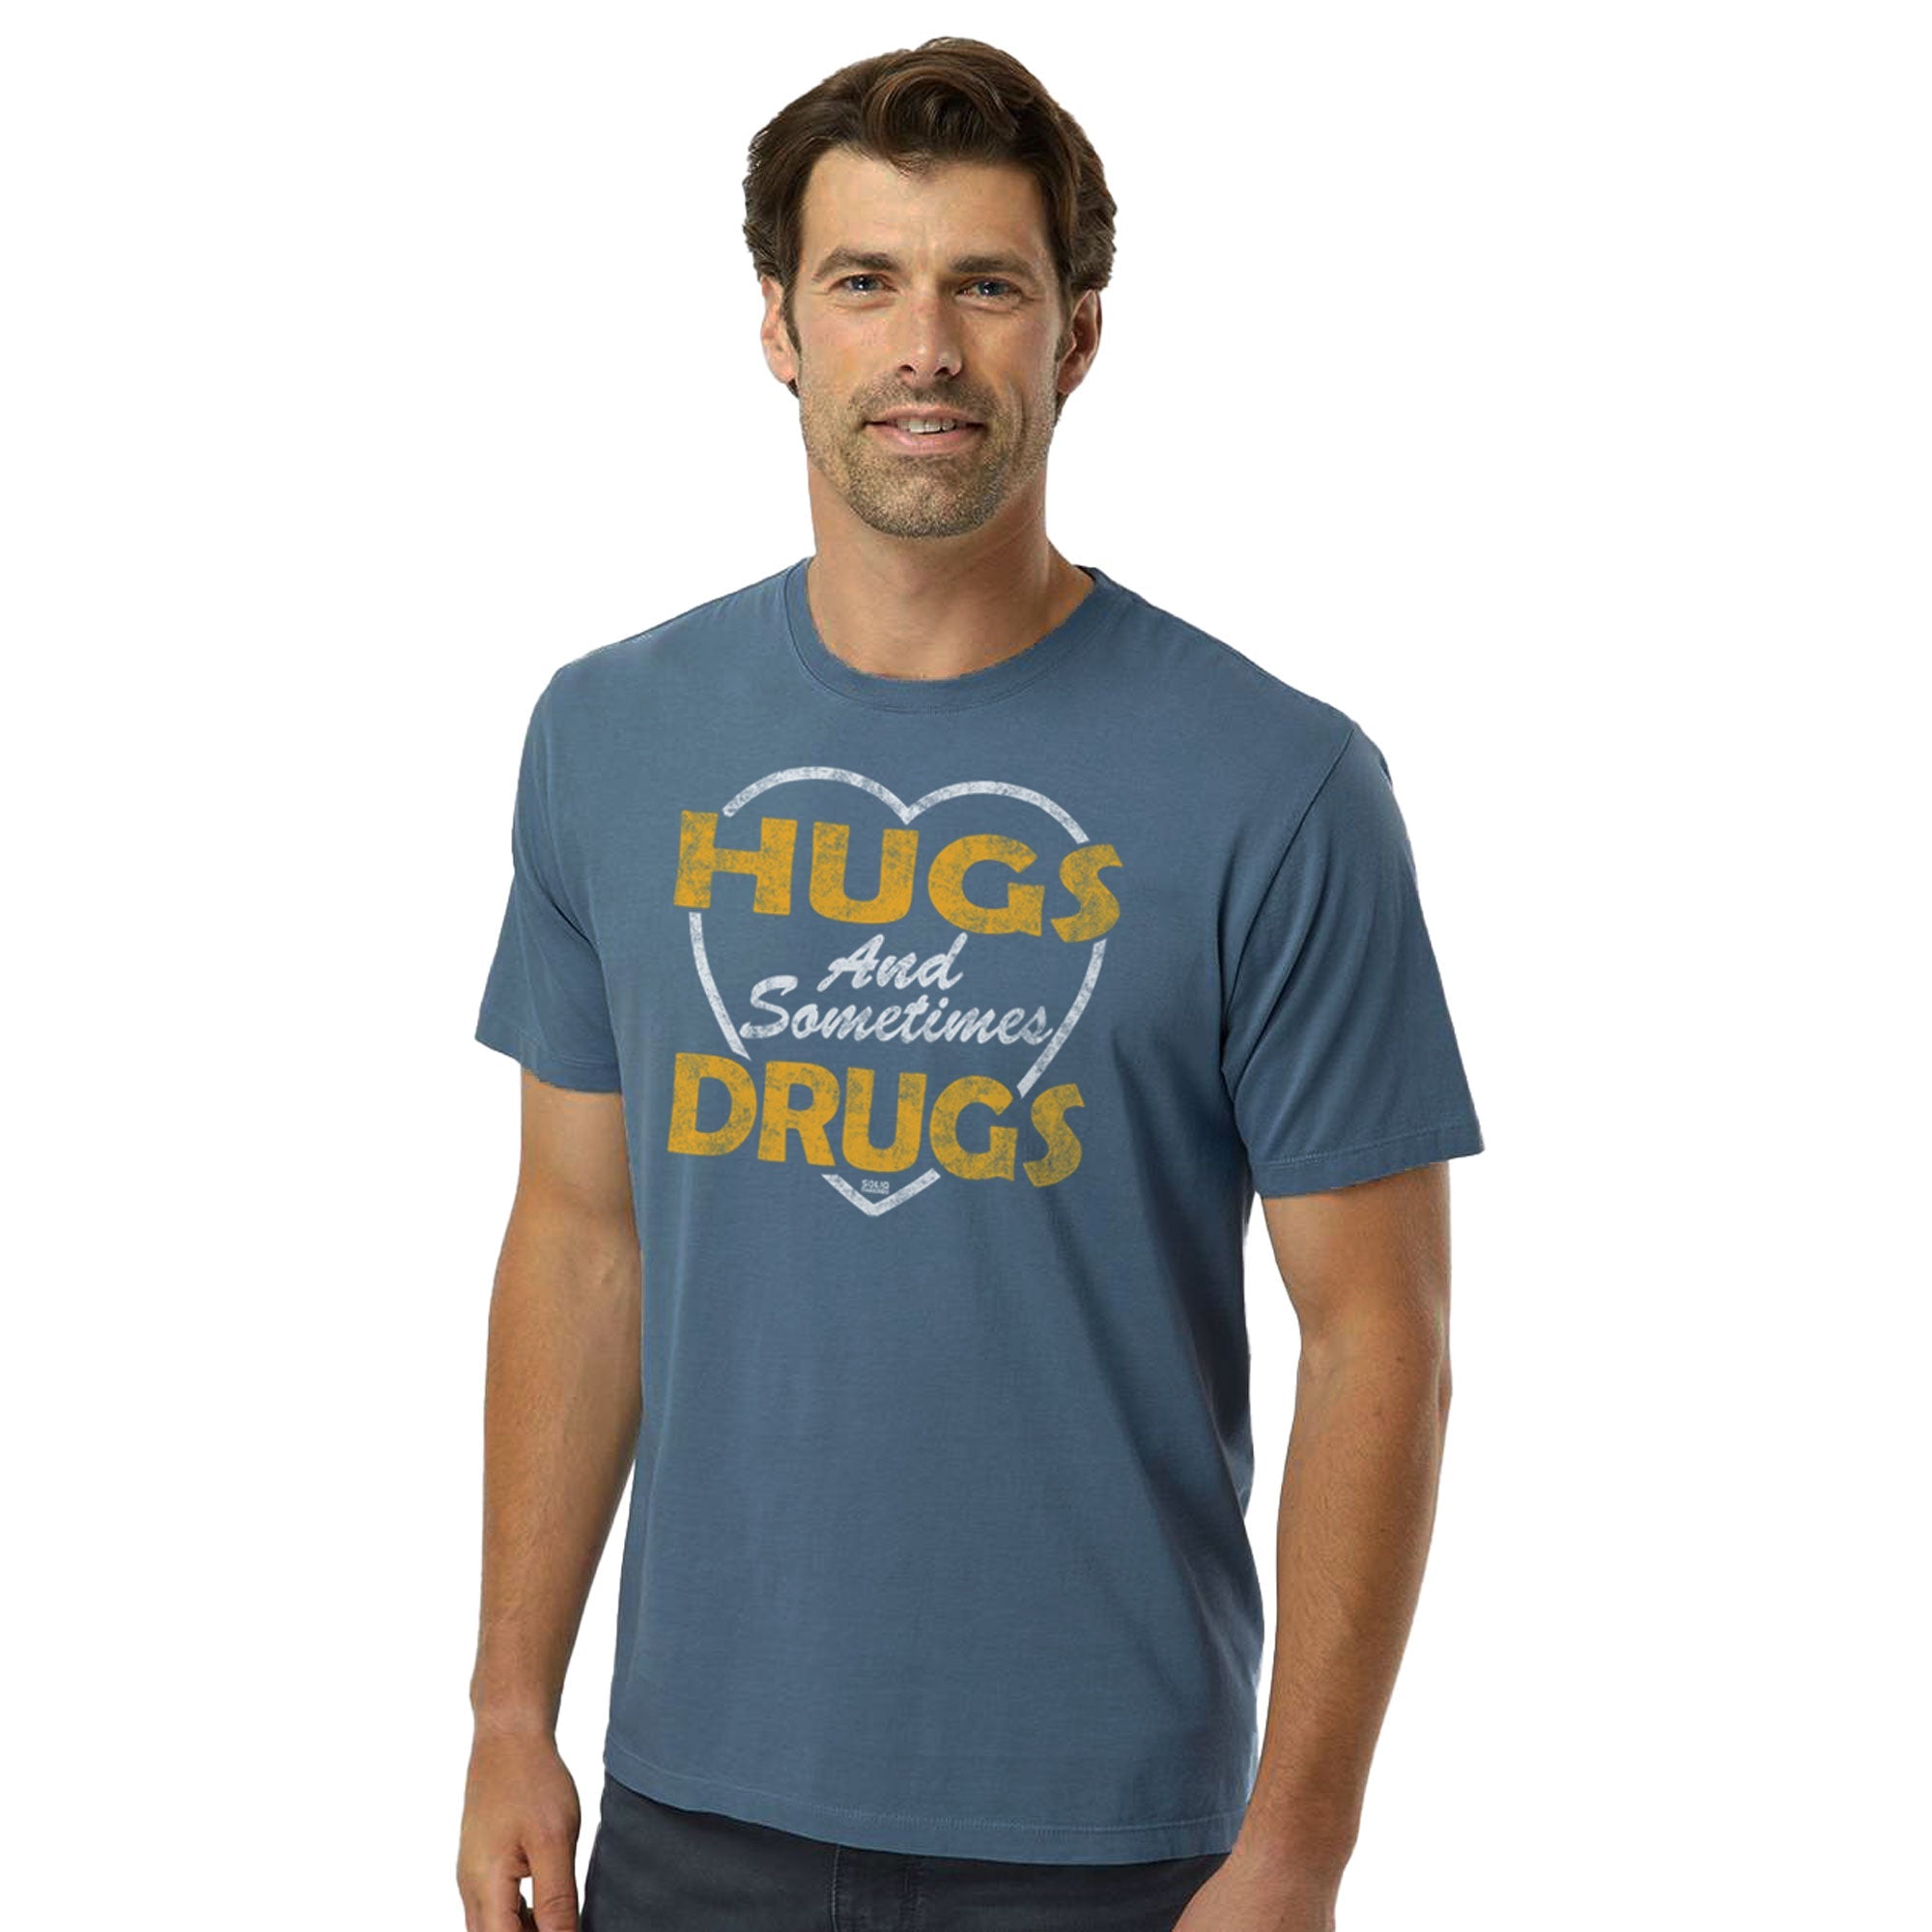 Hugs And Sometimes Drugs Retro Organic Cotton T-shirt | Funny Festival   Tee On Model | Solid Threads